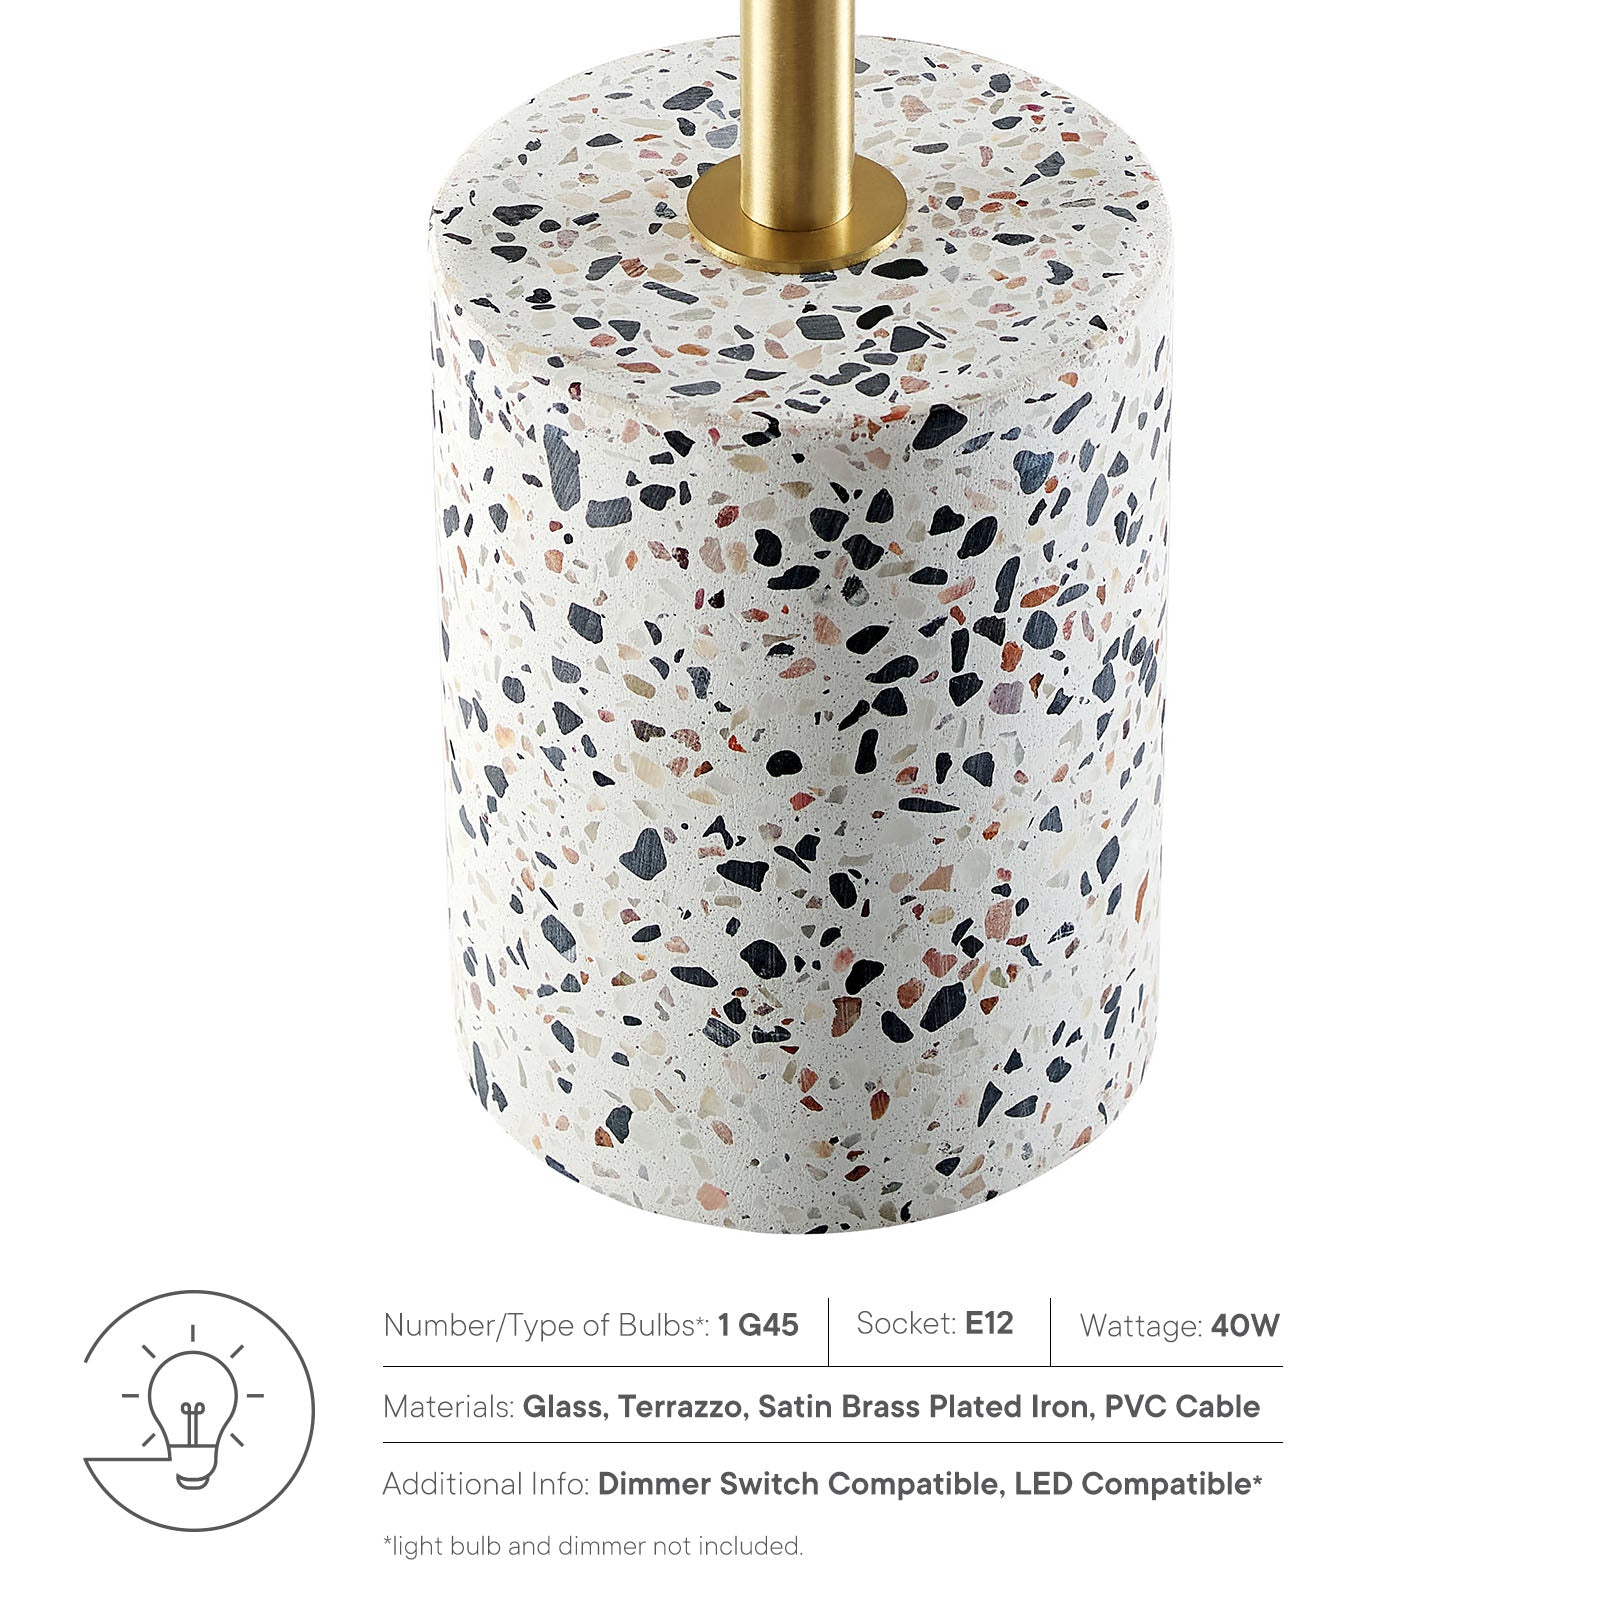 Modway Table Lamps - Logic Terrazzo Table Lamps White